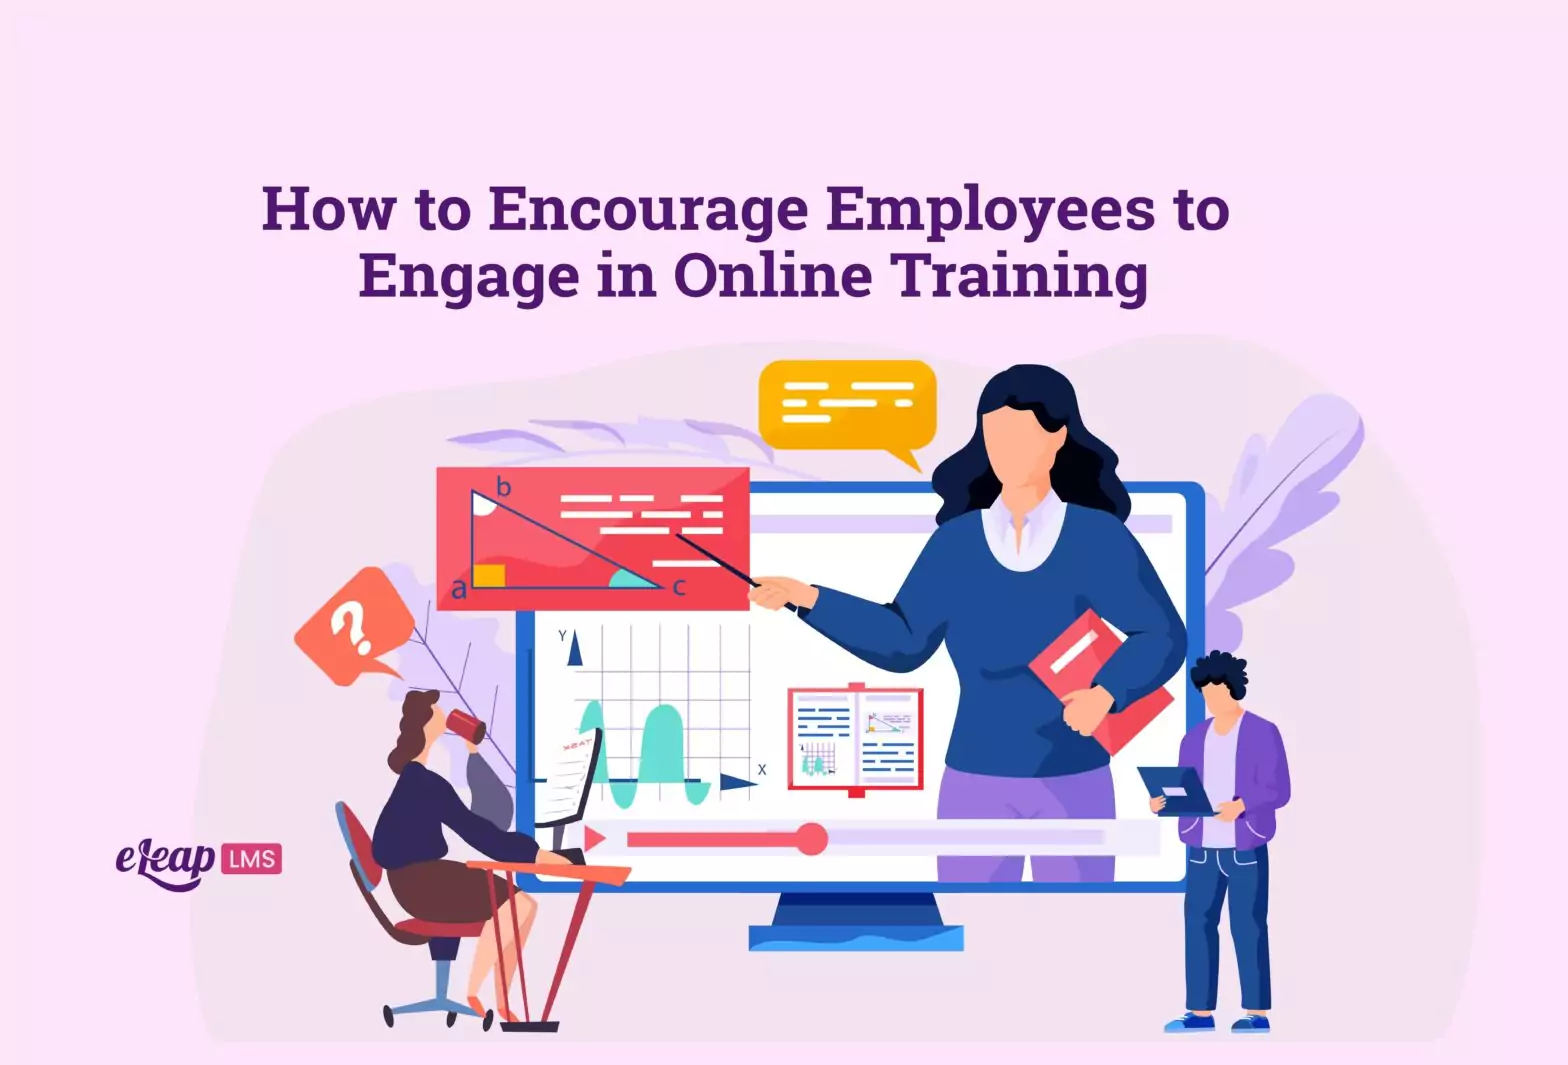 How to Encourage Employees to Engage in Online Training